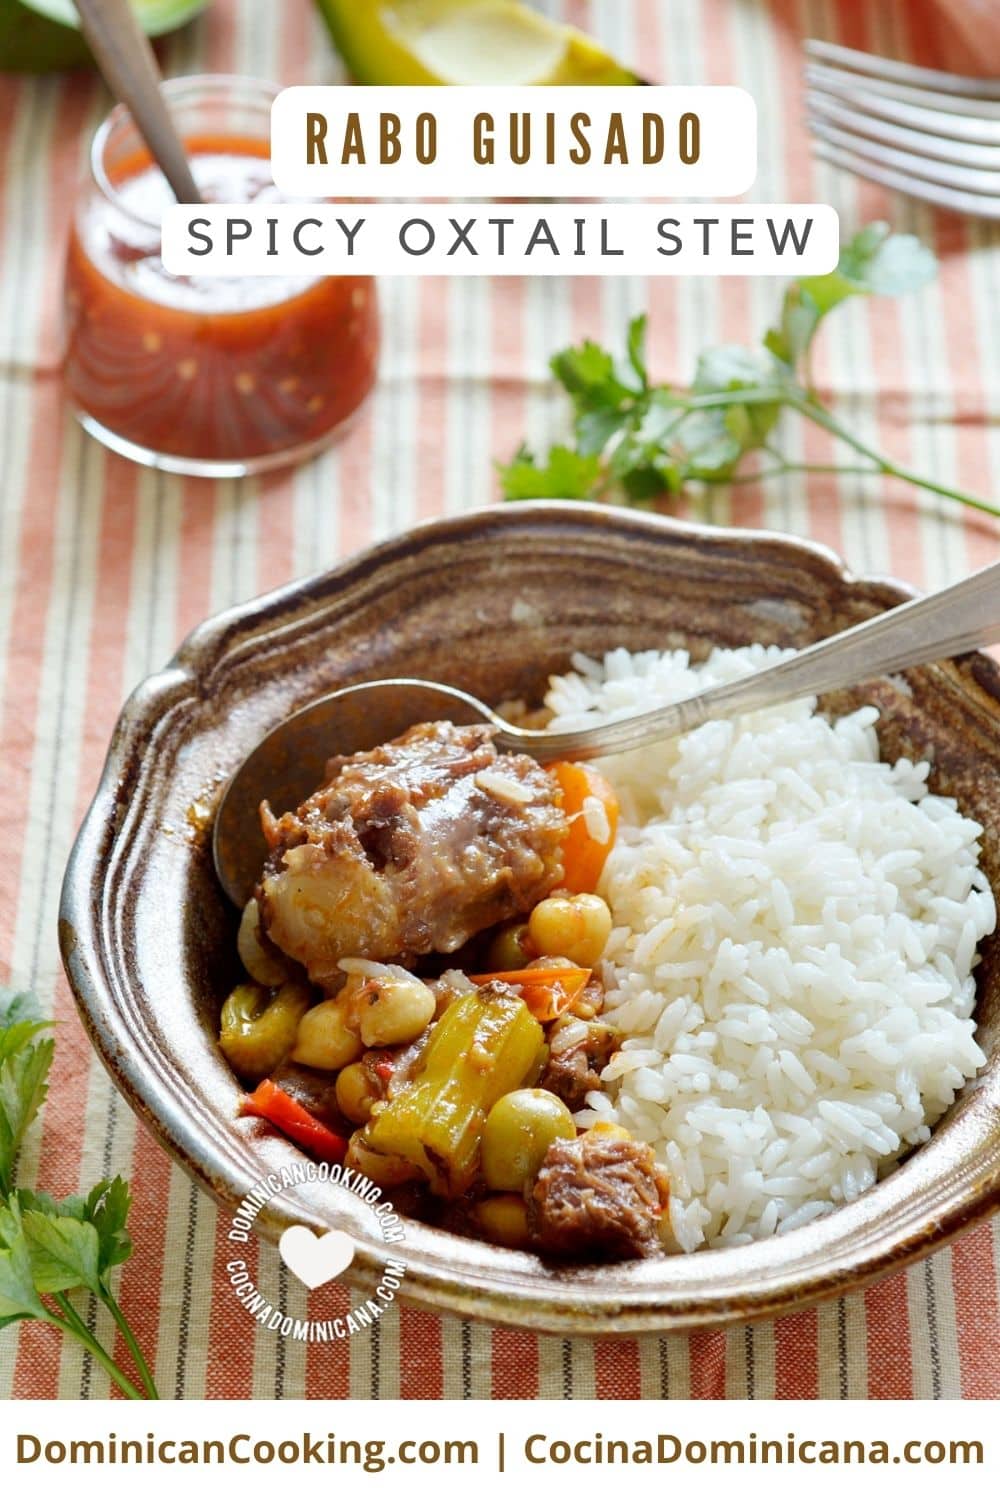 Rabo guisado (spicy oxtail stew) recipe.